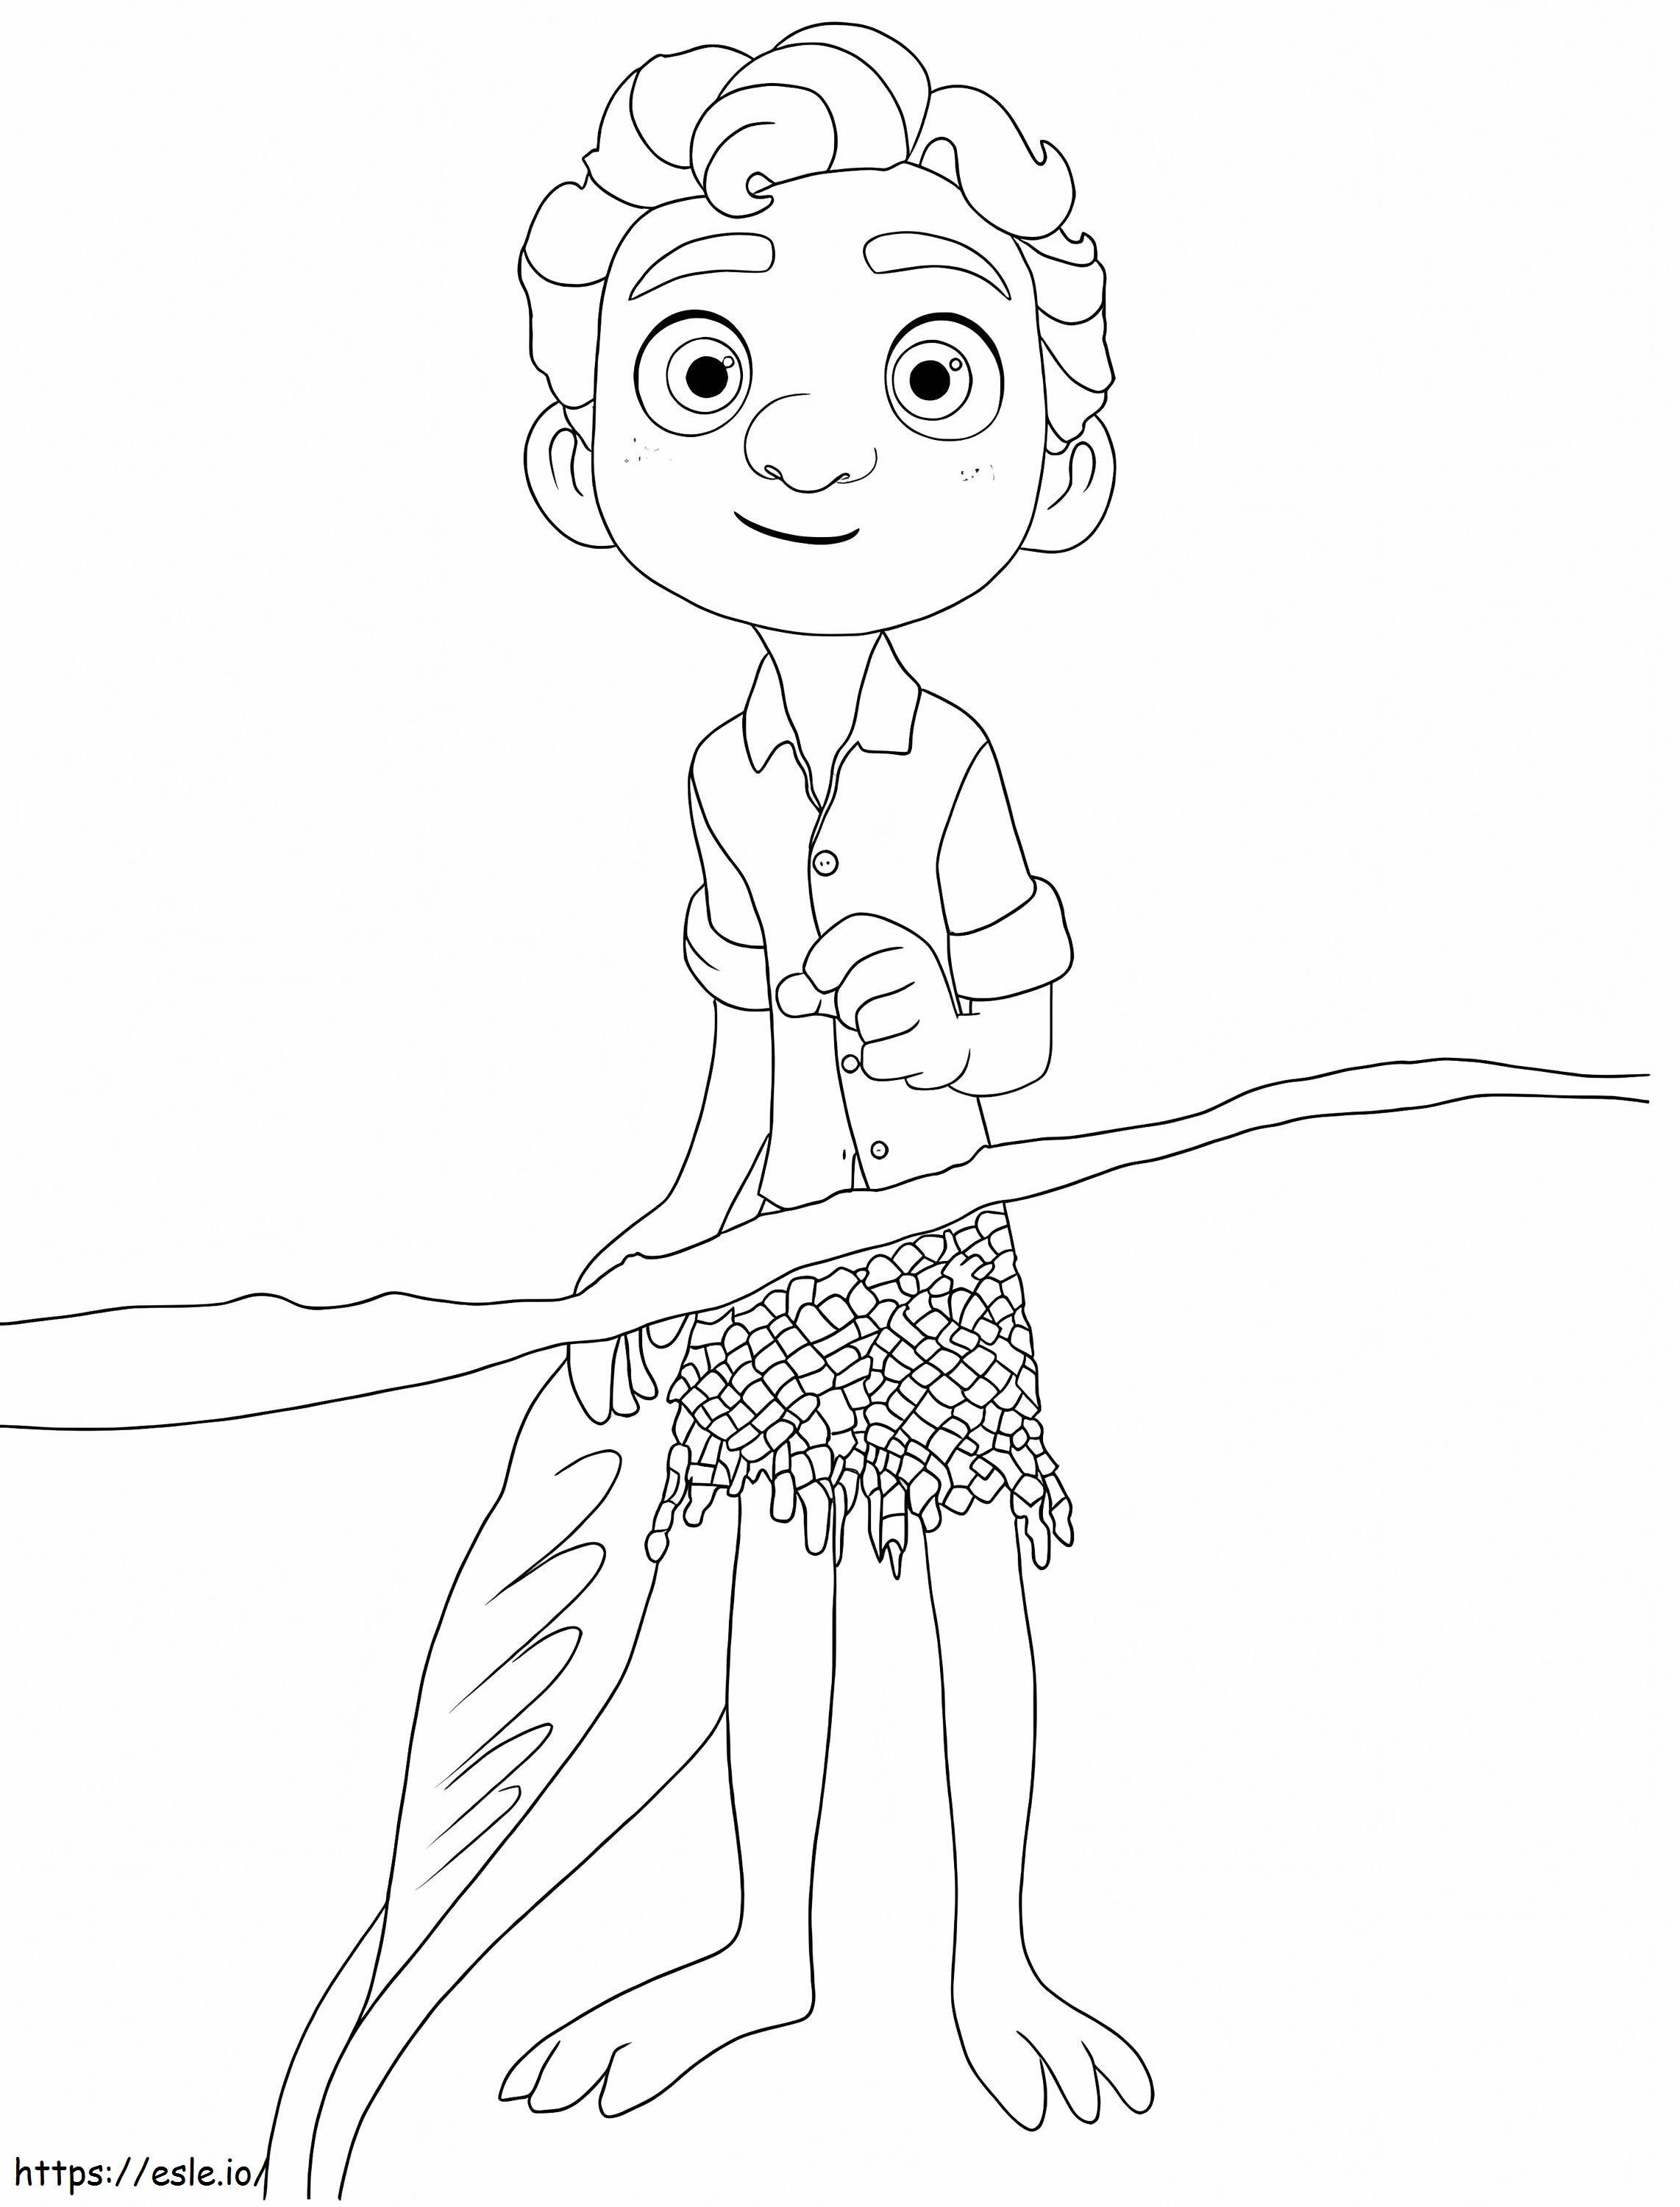 Luca Is Smiling coloring page